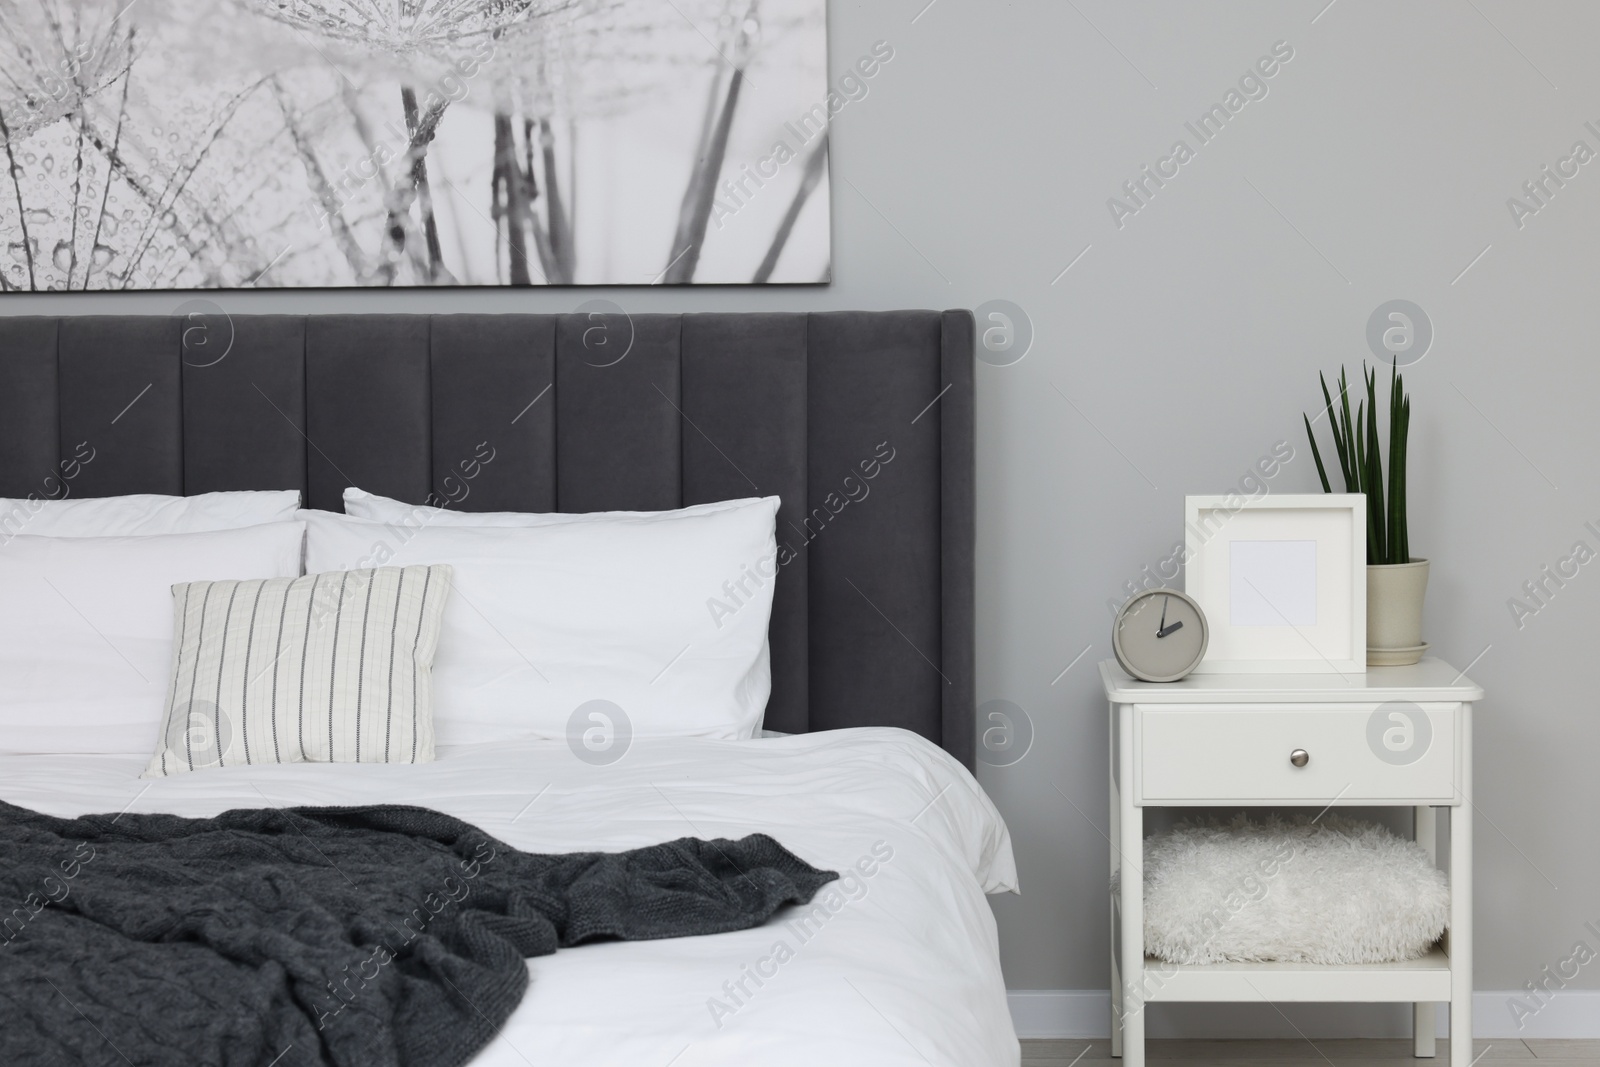 Photo of Large comfortable bed and bedside table in room. Stylish interior